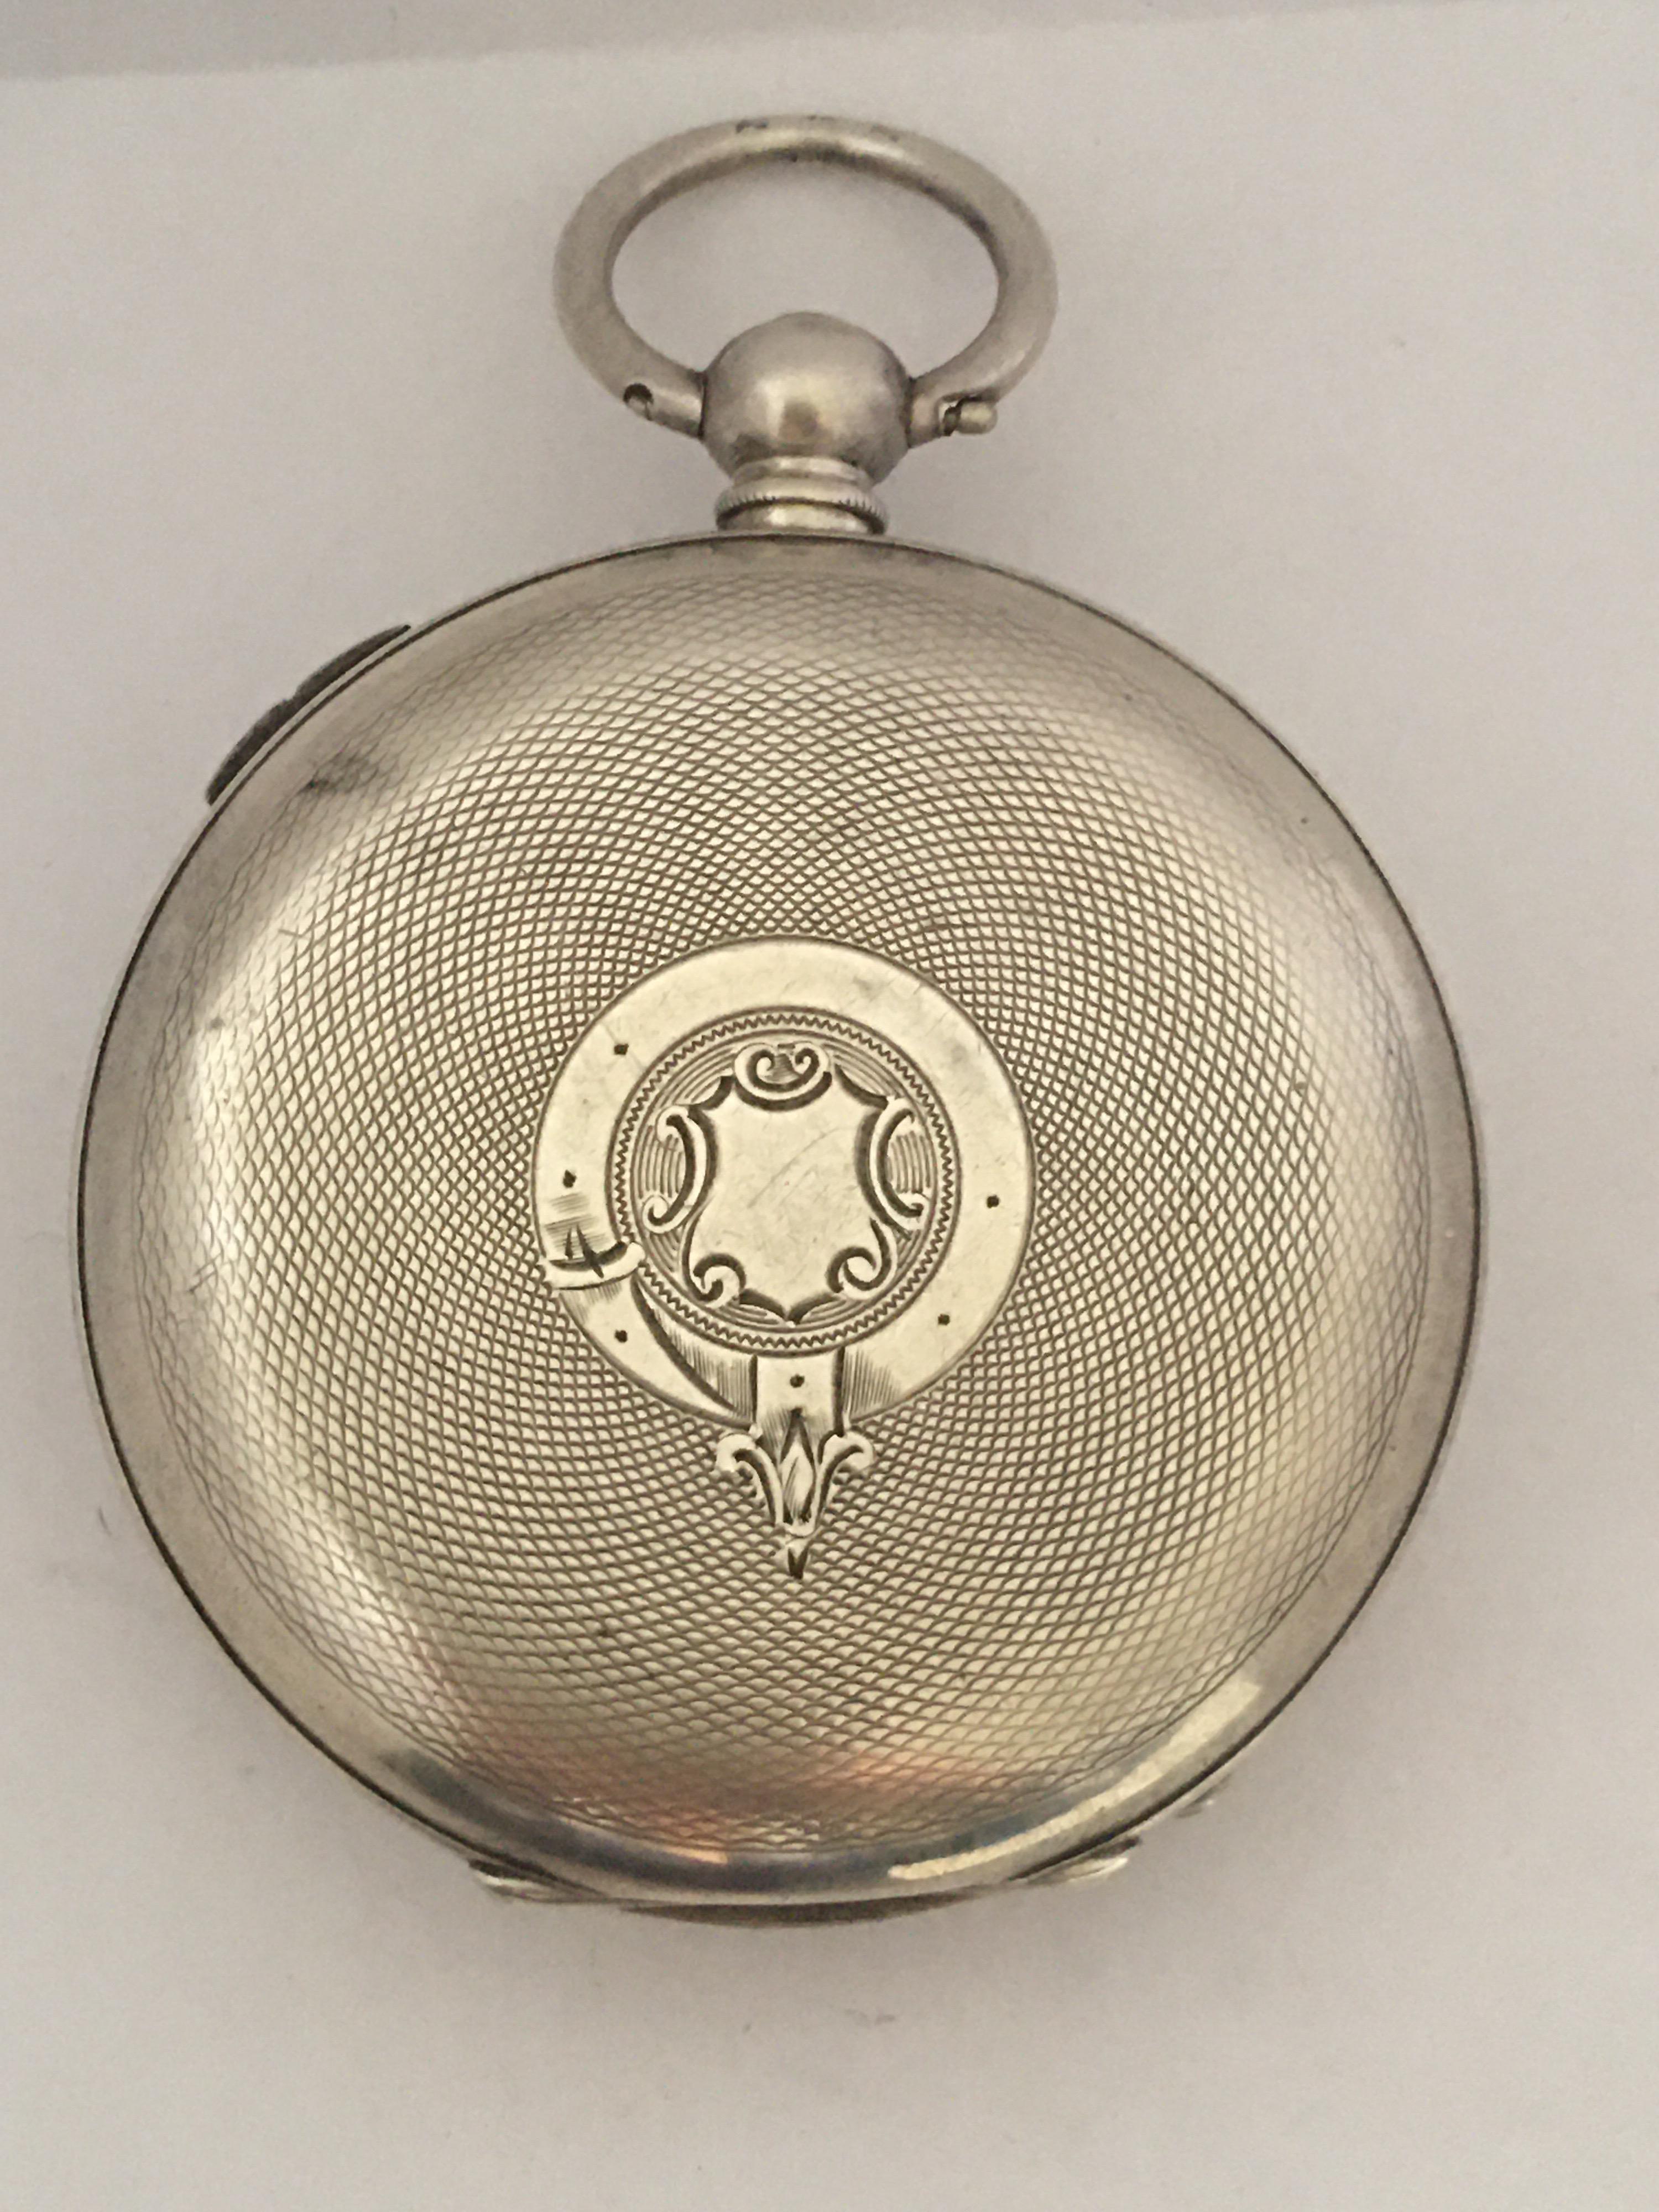 This Charming Antique Silver pocket watch with a stop watch mechanism is working and it is ticking well. And it comes with a key

Please study the images carefully as form part of the description.